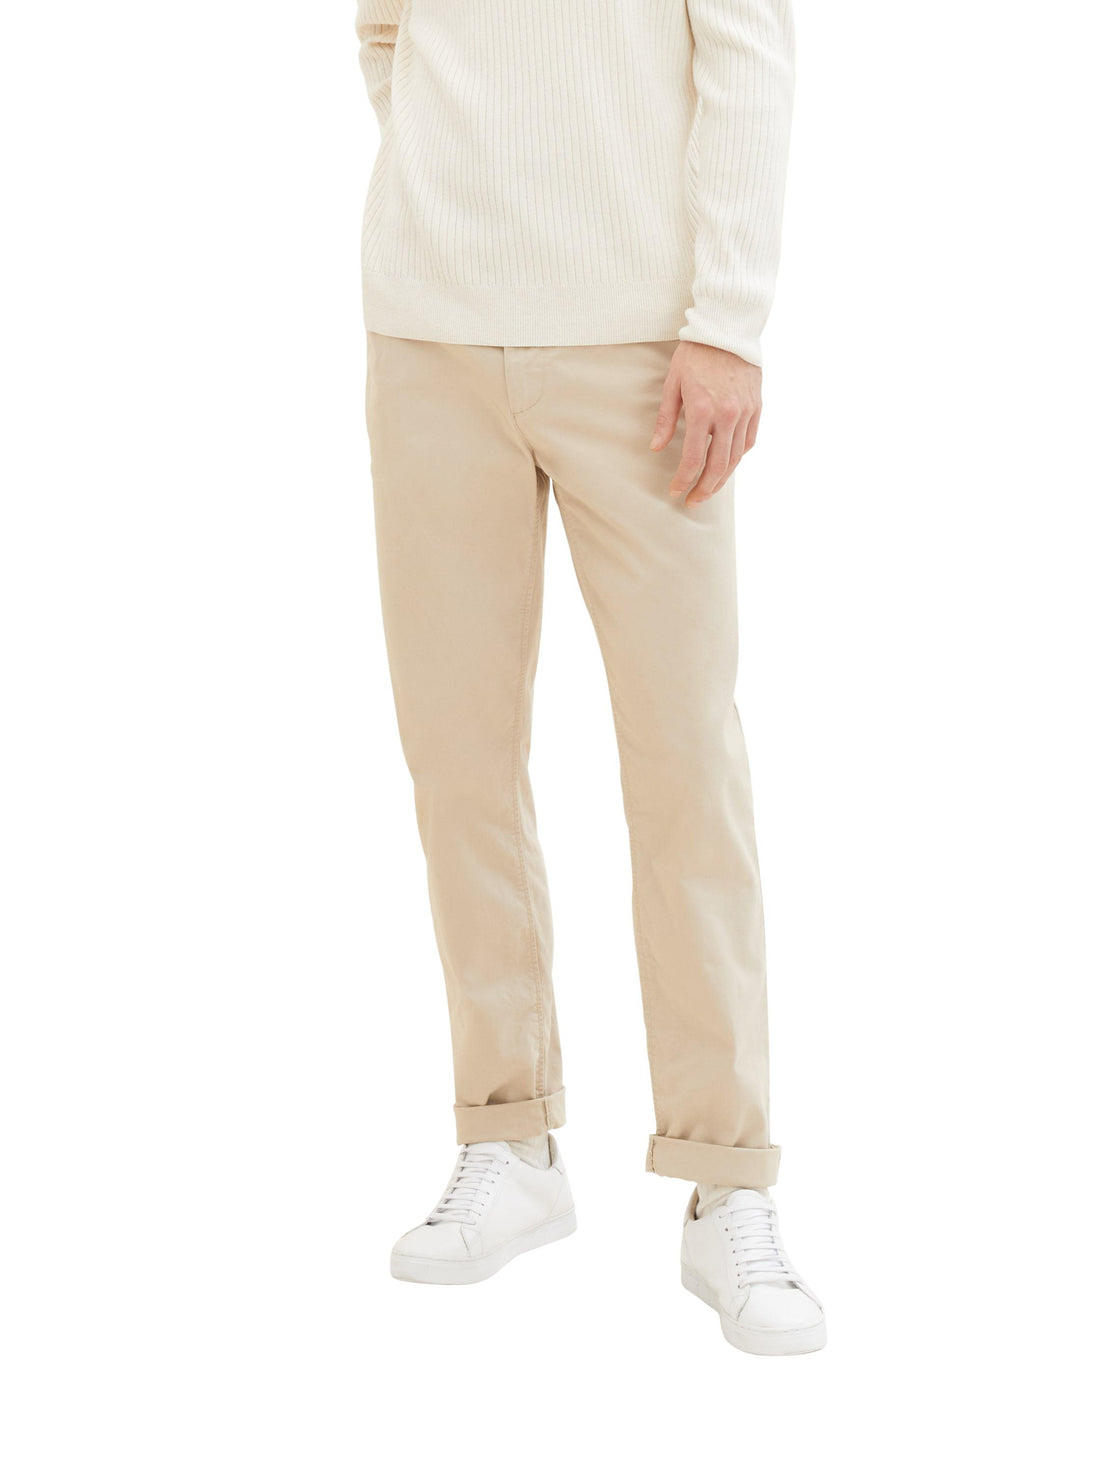 Regular Washed Chino In 2 Lengths_1040240_11704_01